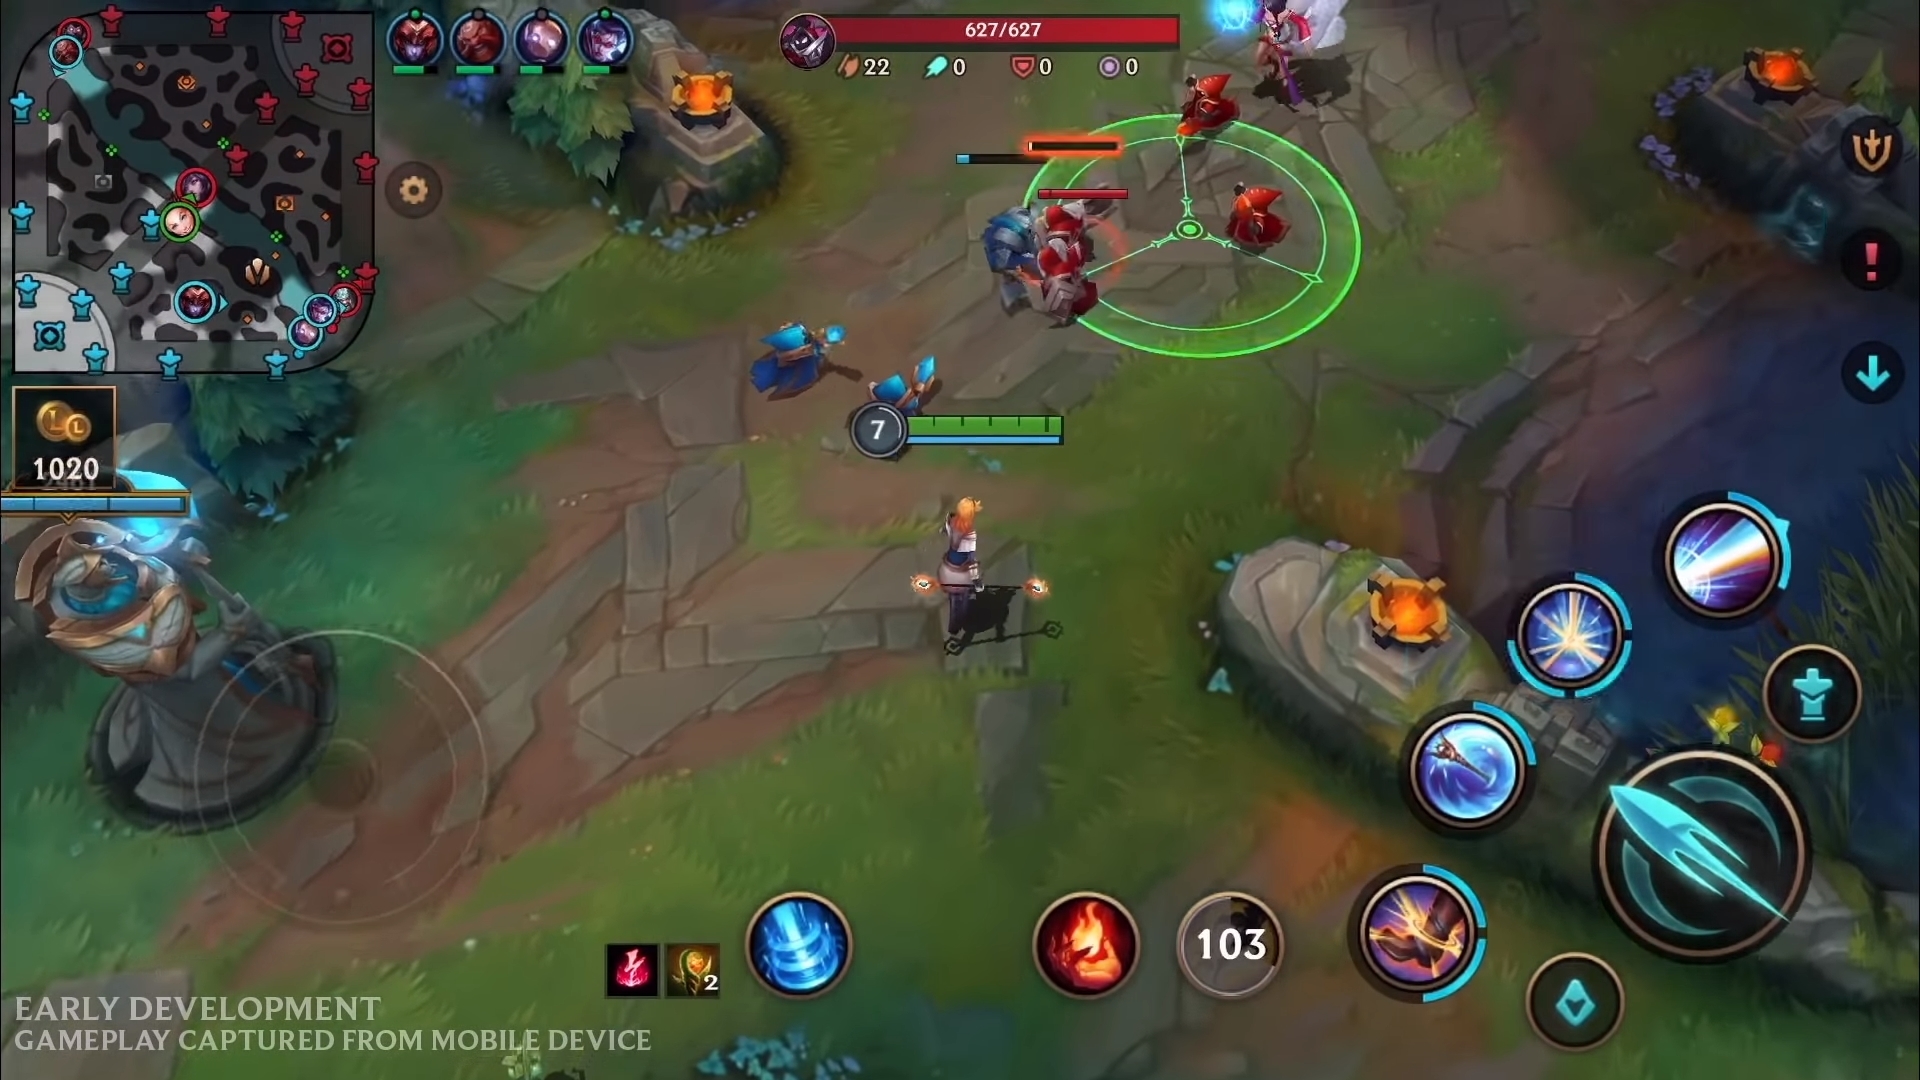 League Of Legends Wild Rift First Gameplay And Details Shown For Mobile